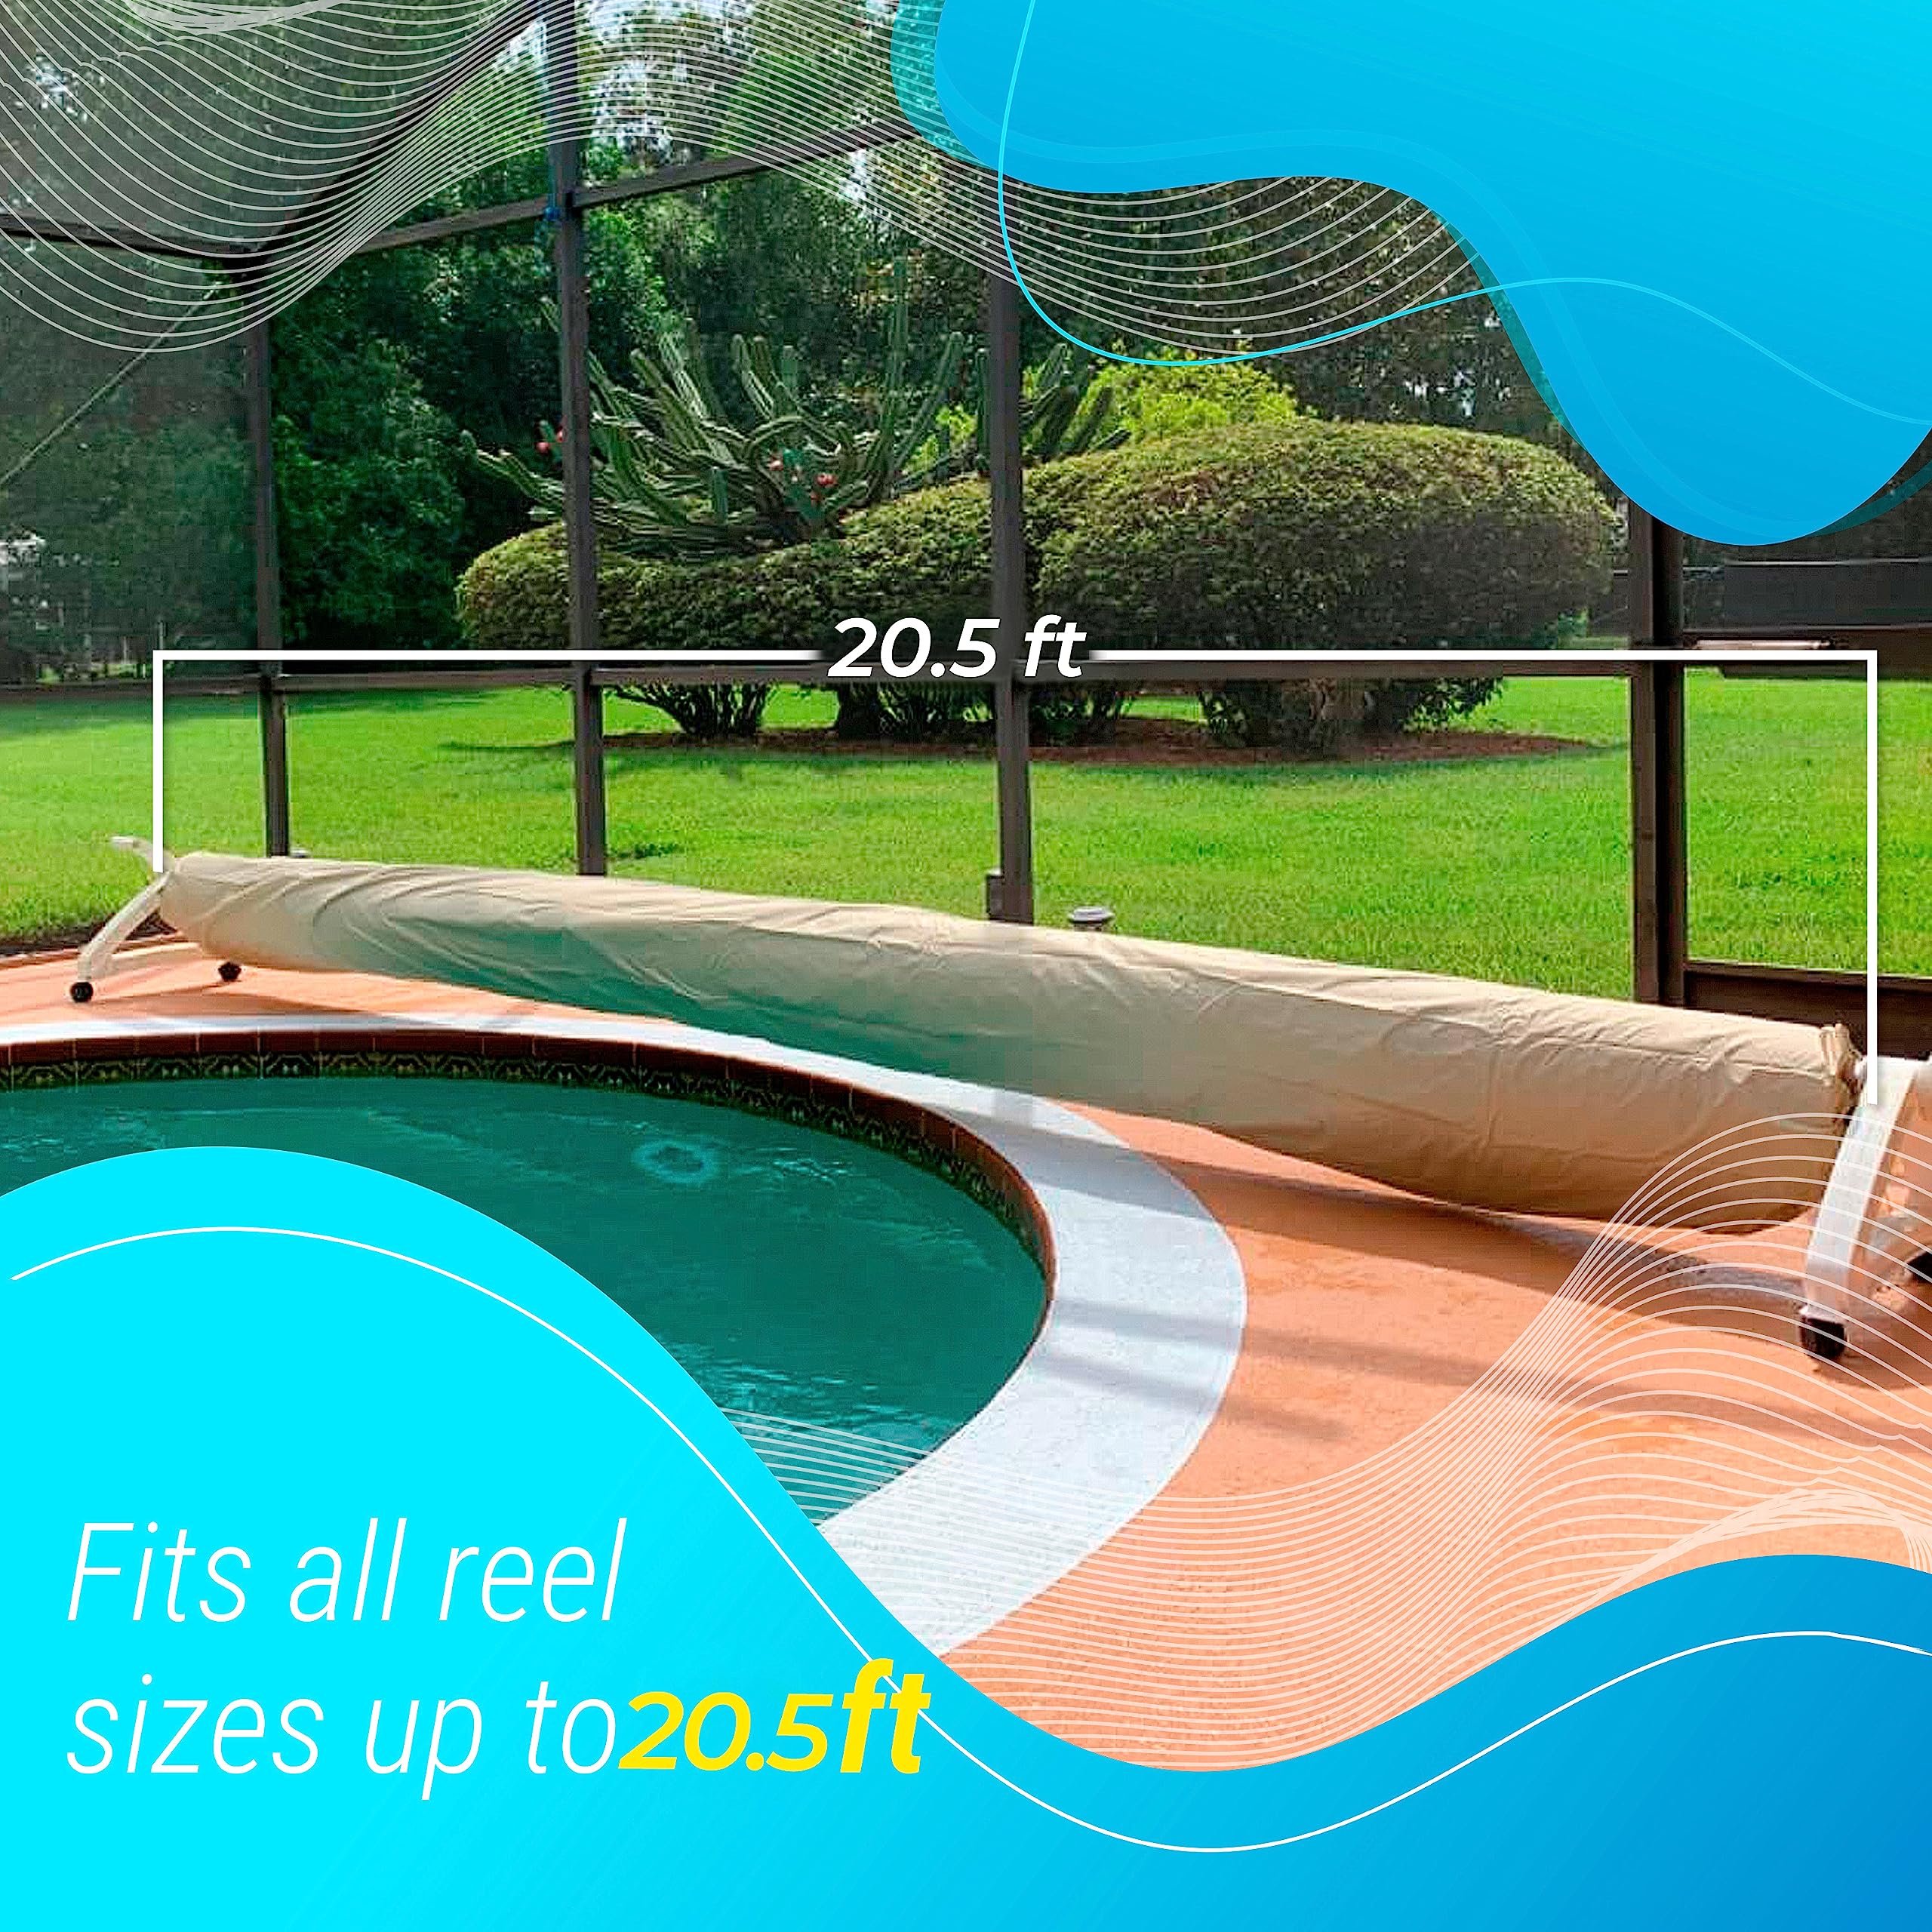 Pool Covers for Inground Pools, Pools Reel up to 20FT, Heavy Duty Waterproof Solar Blanket Cover for Pool